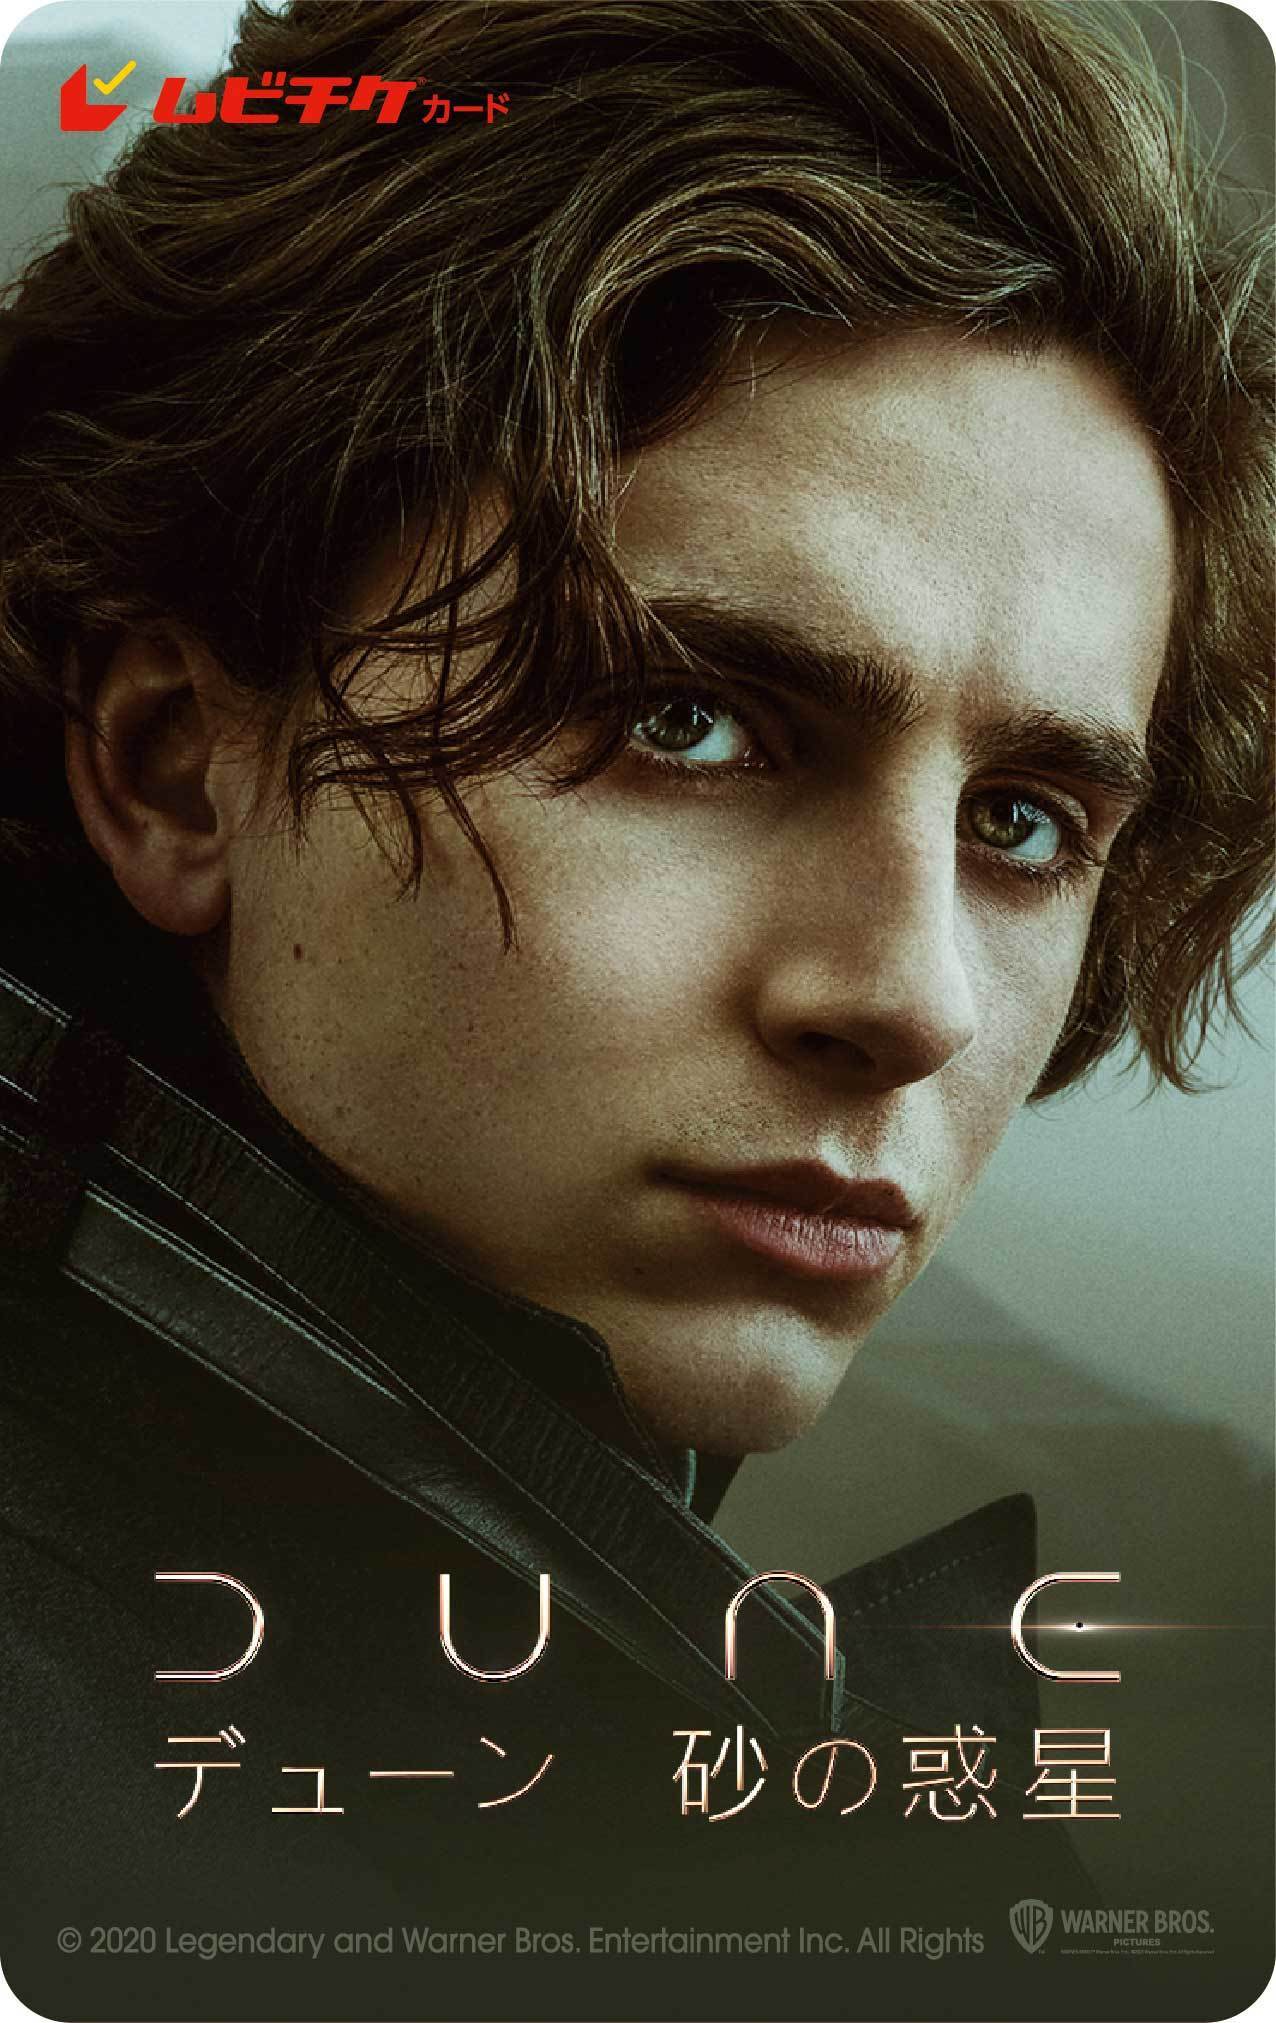 『DUNE/デューン 砂の惑星』ムビチケ (c)2020 Legendary and Warner Bros. Entertainment Inc. All Rights Reserved